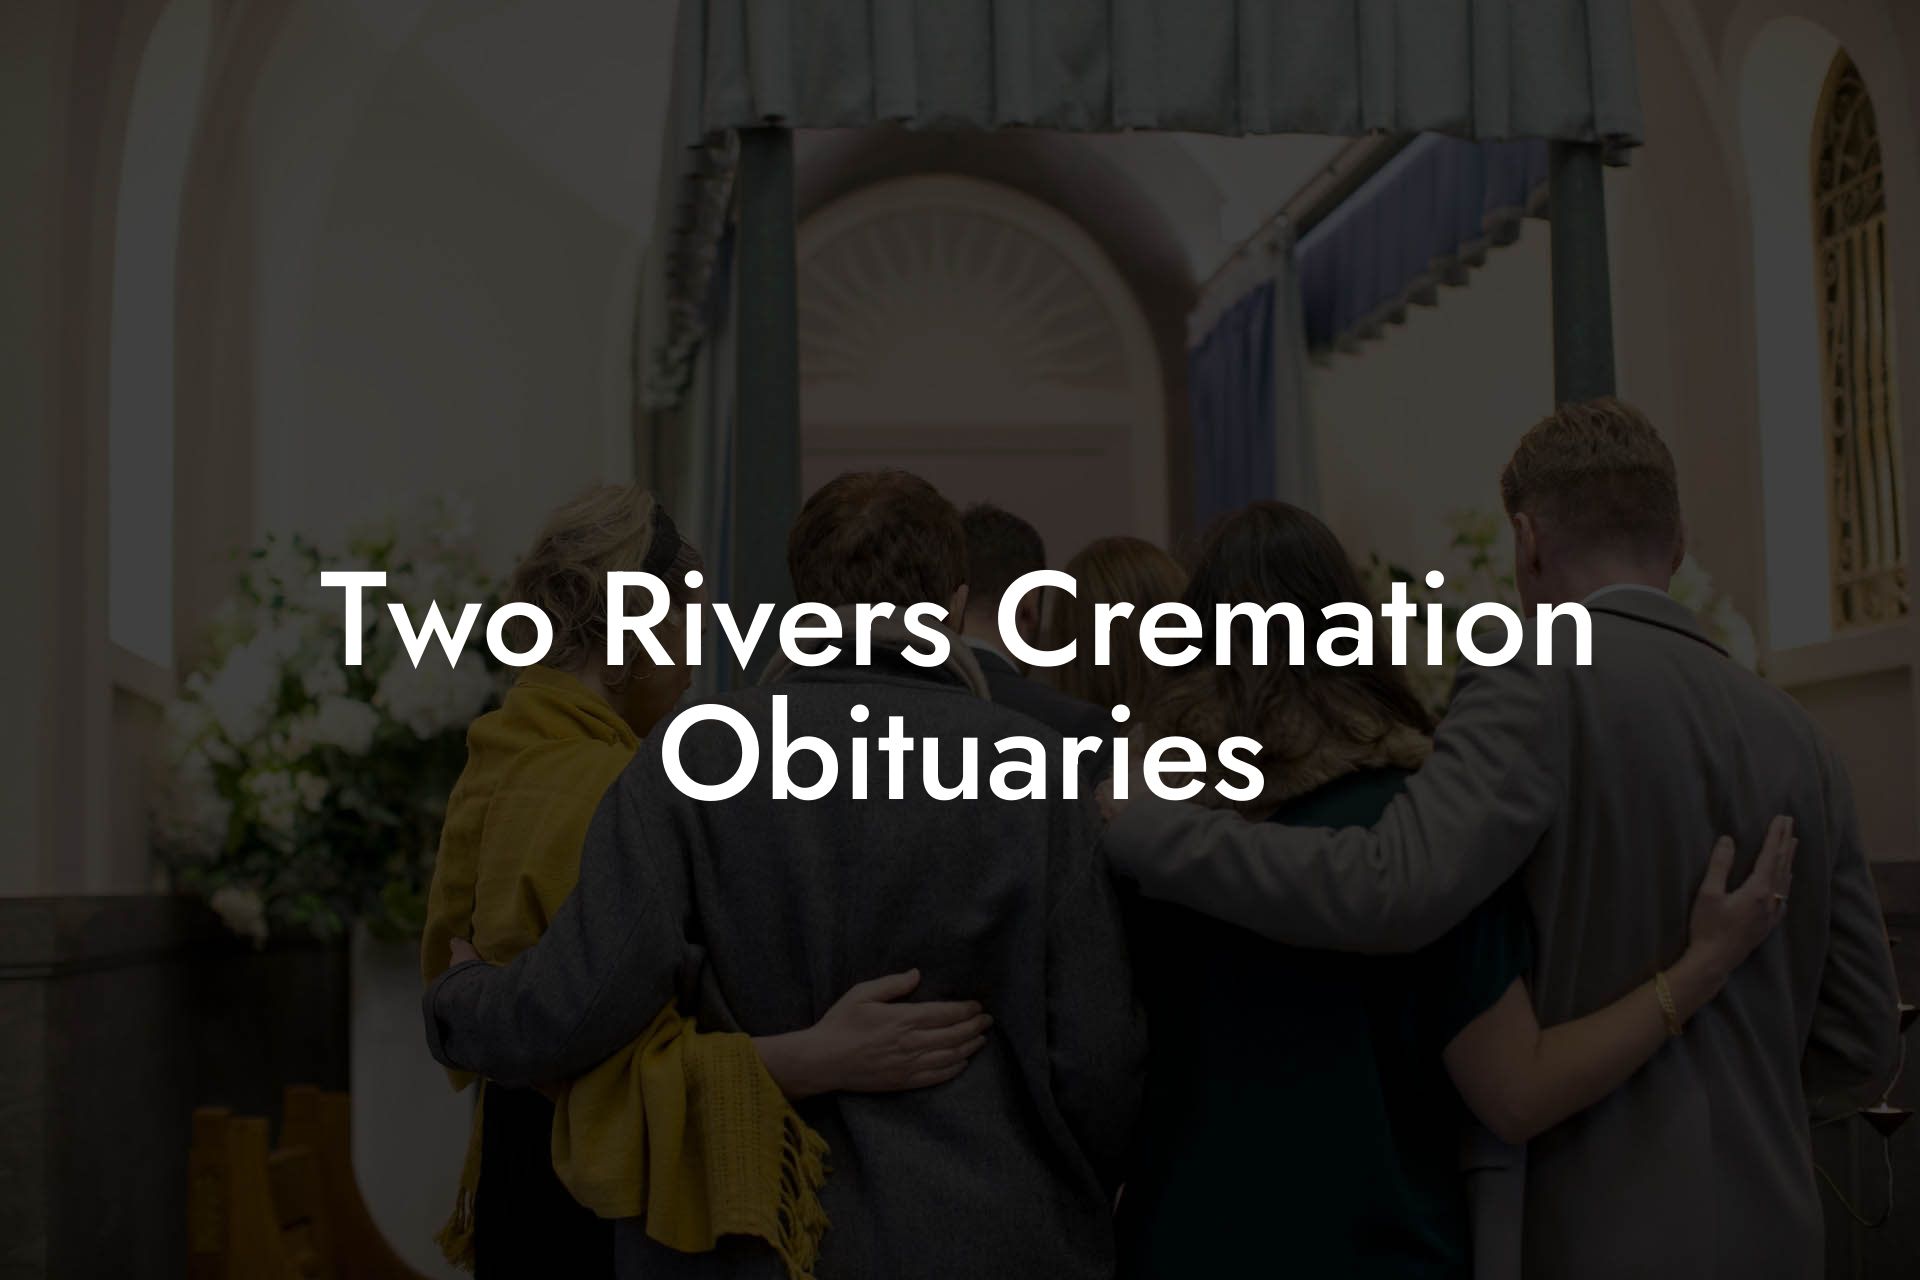 Two Rivers Cremation Obituaries